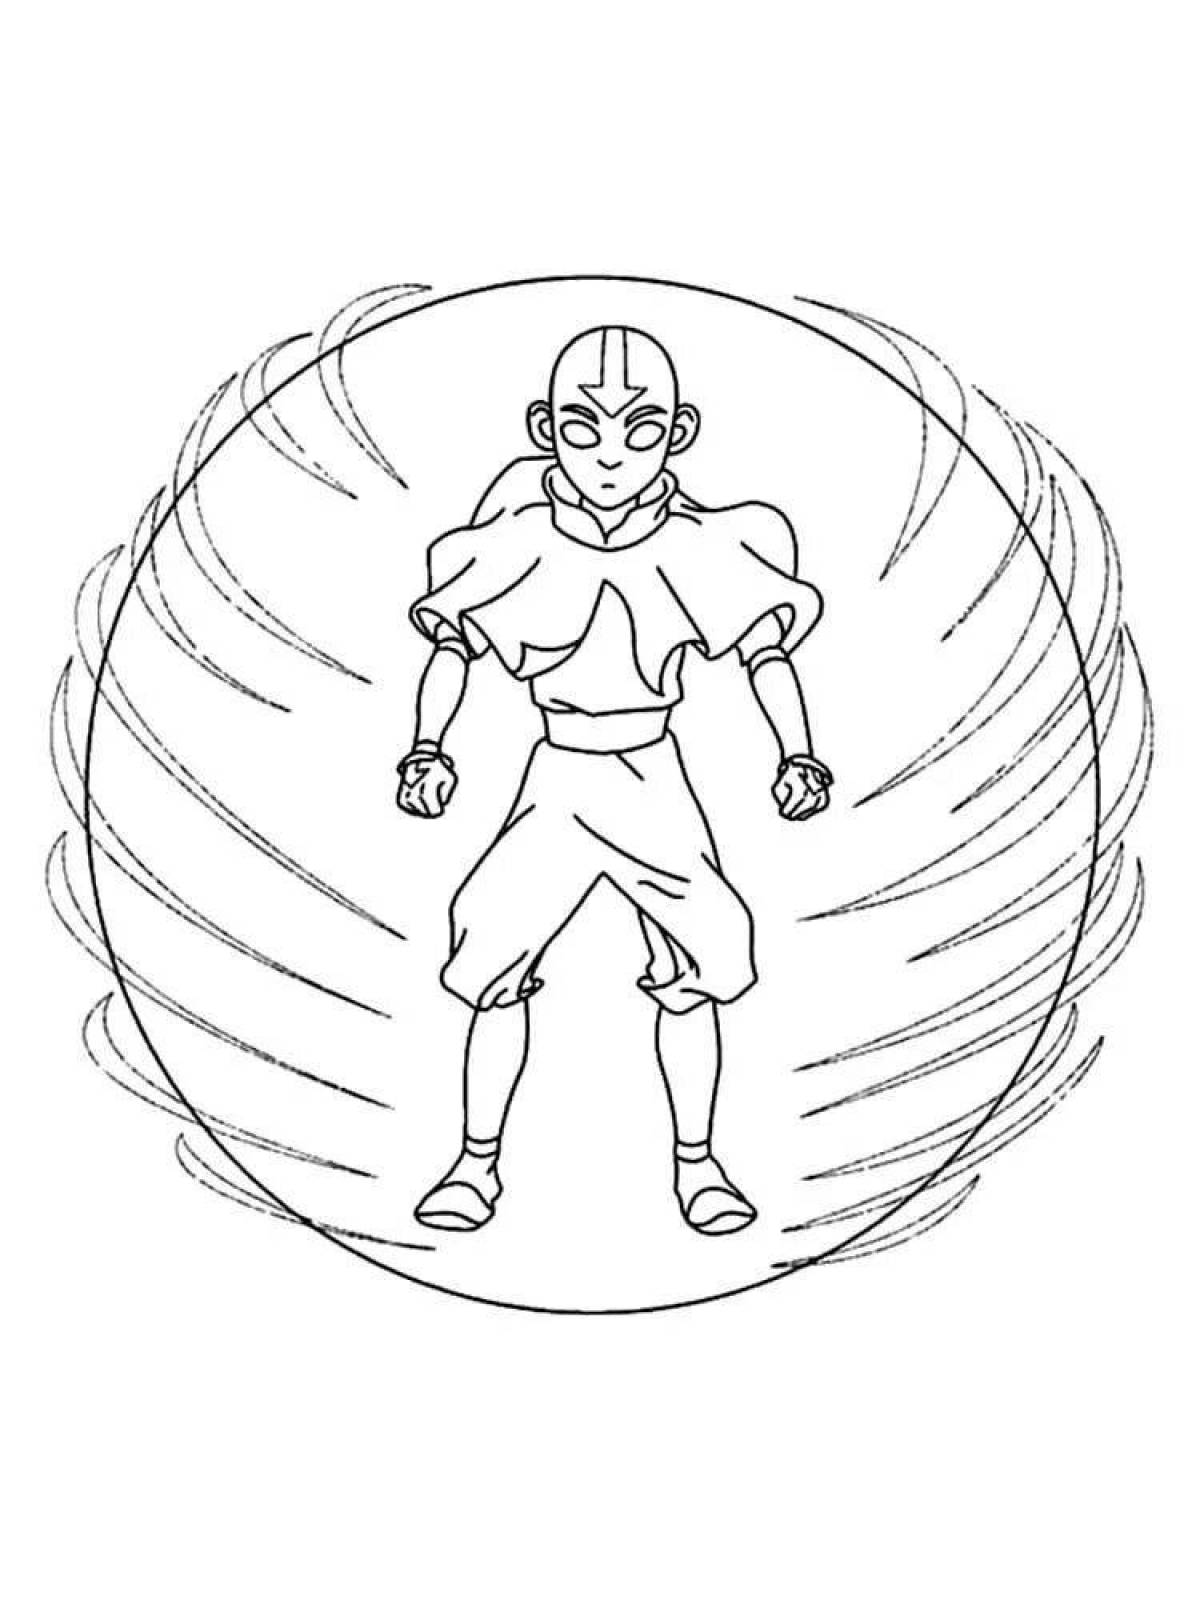 The Last Airbender coloring book avatar